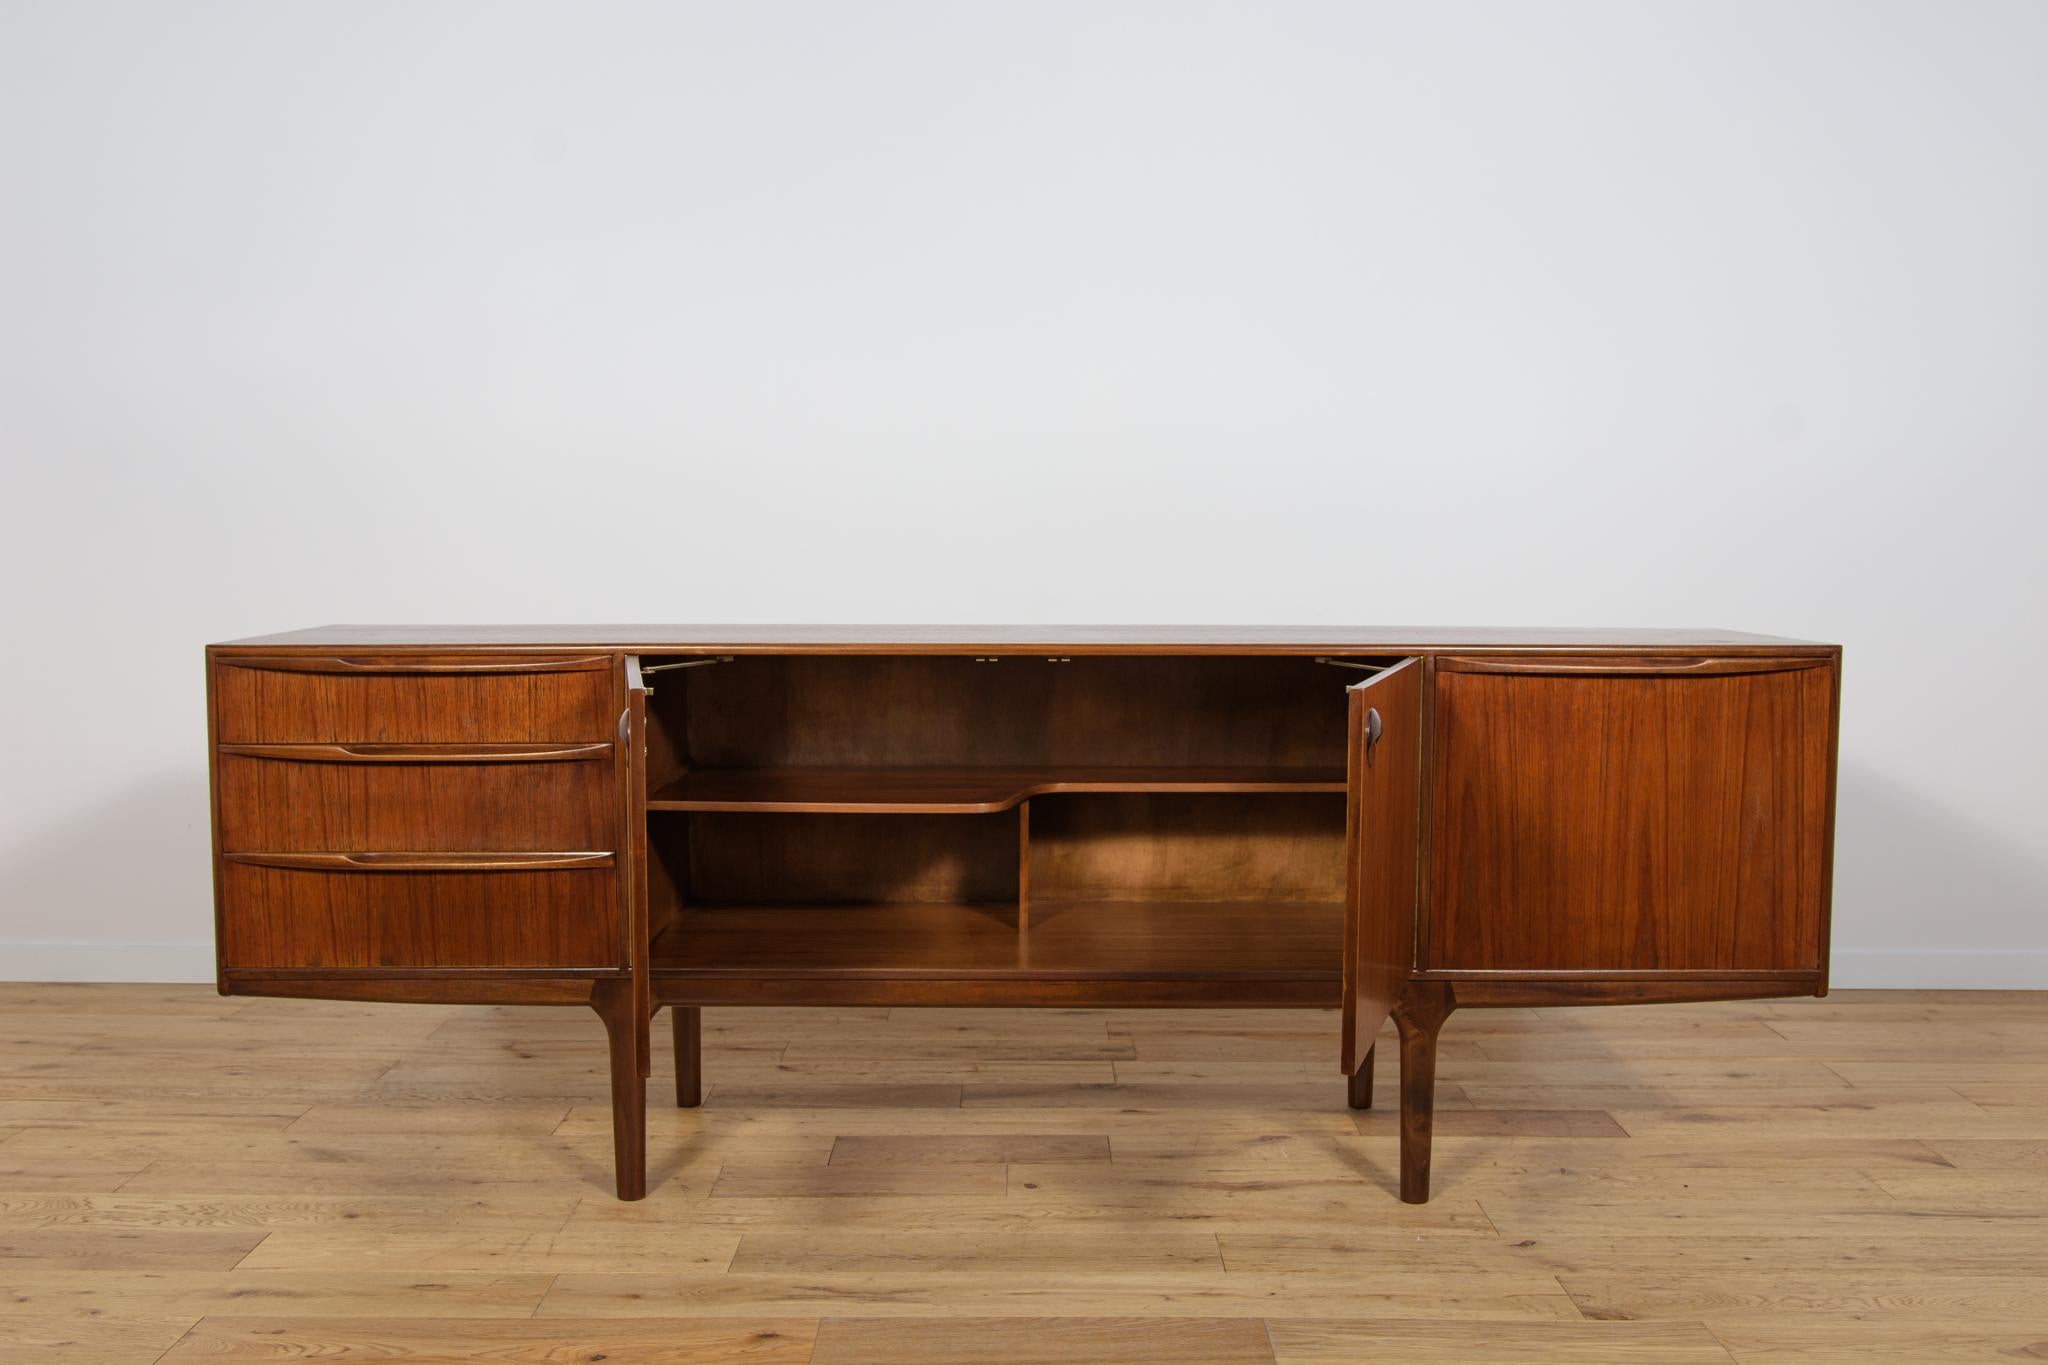  Mid-Century Teak Sideboard by Tom Robertson for McIntosh, United Knigdom, 1960s For Sale 3